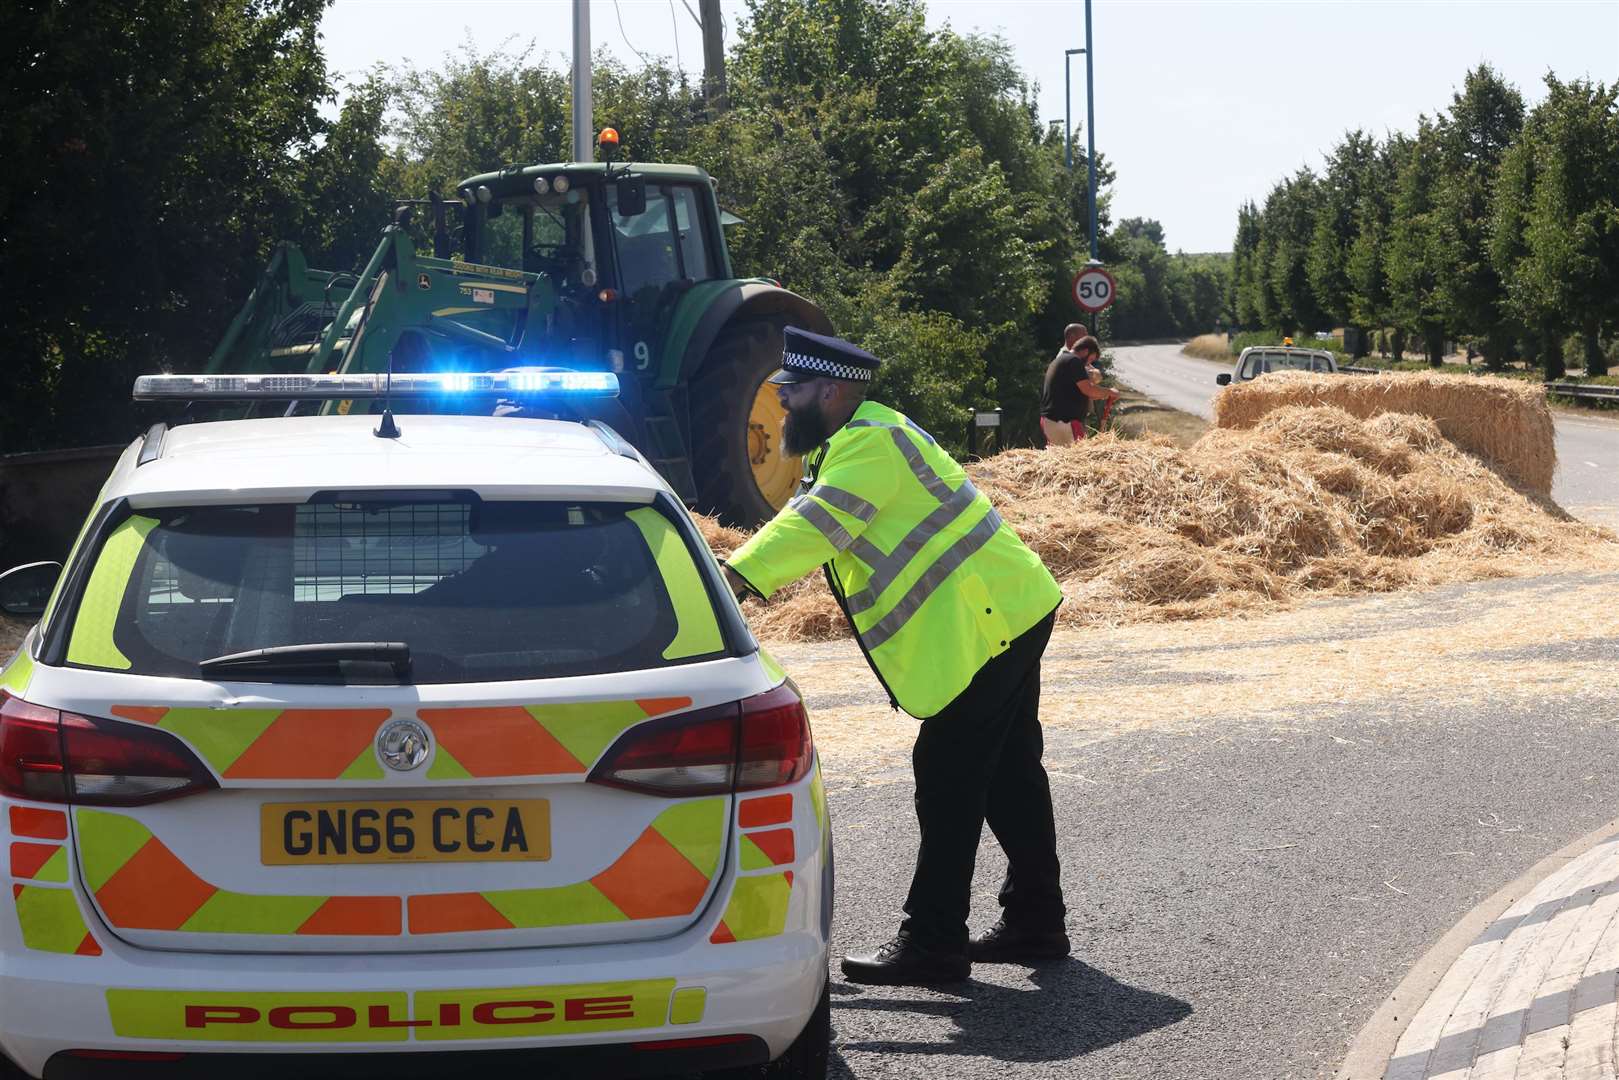 Police closed the road while two men worked to clear the fallen hay. Images: UKNIP